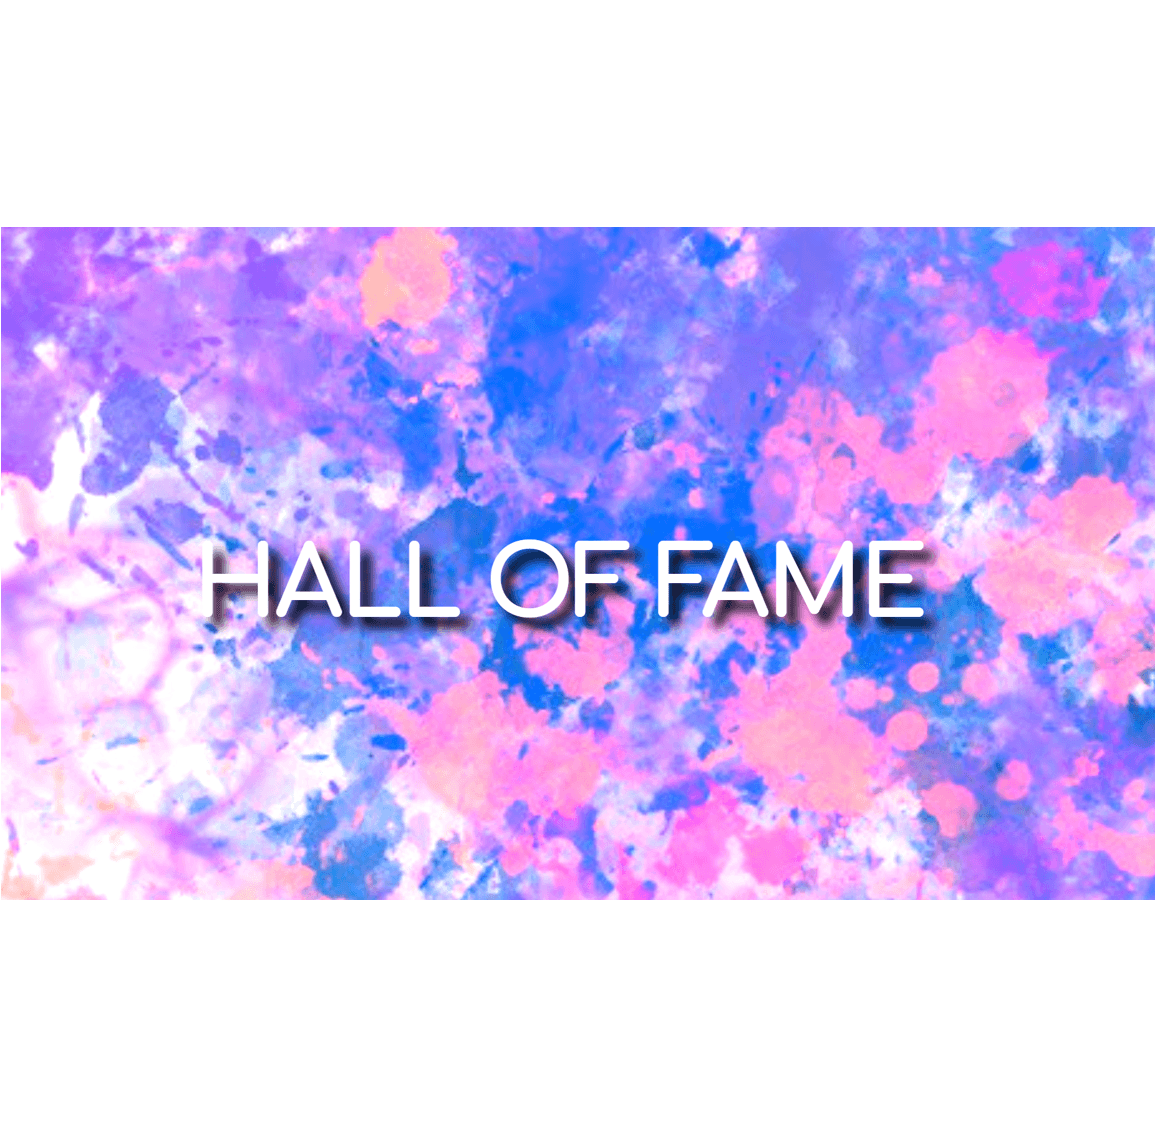 Collectors Hall of fame